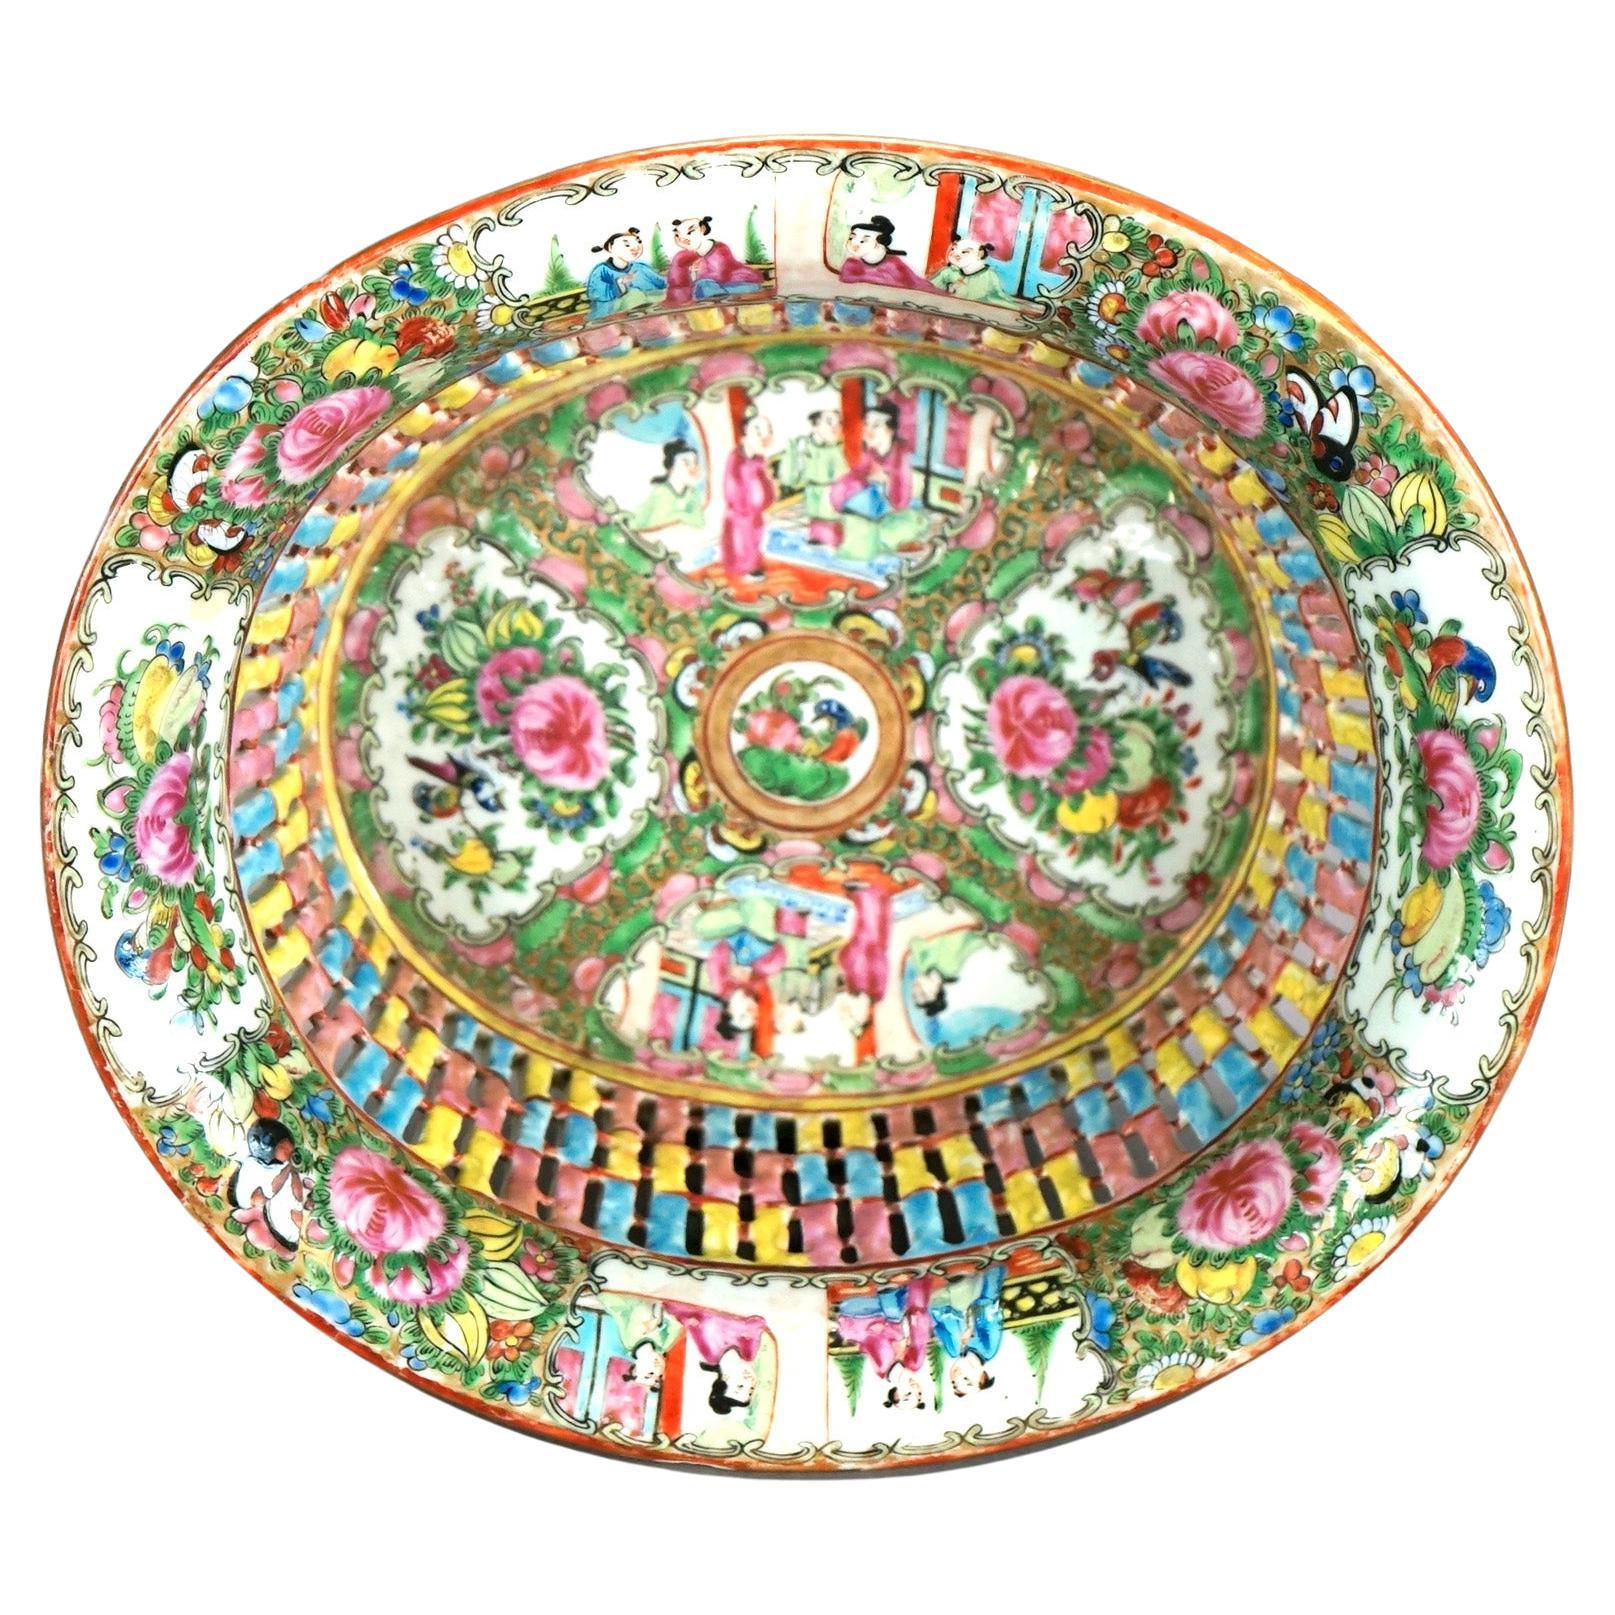 An antique Chinese Rose Medallion basket offers porcelain bowl with reticulated sides and hand painted garden and genre scenes having figures and flowers, c1900

Measures- 4.25''H x 10''W x 11''D